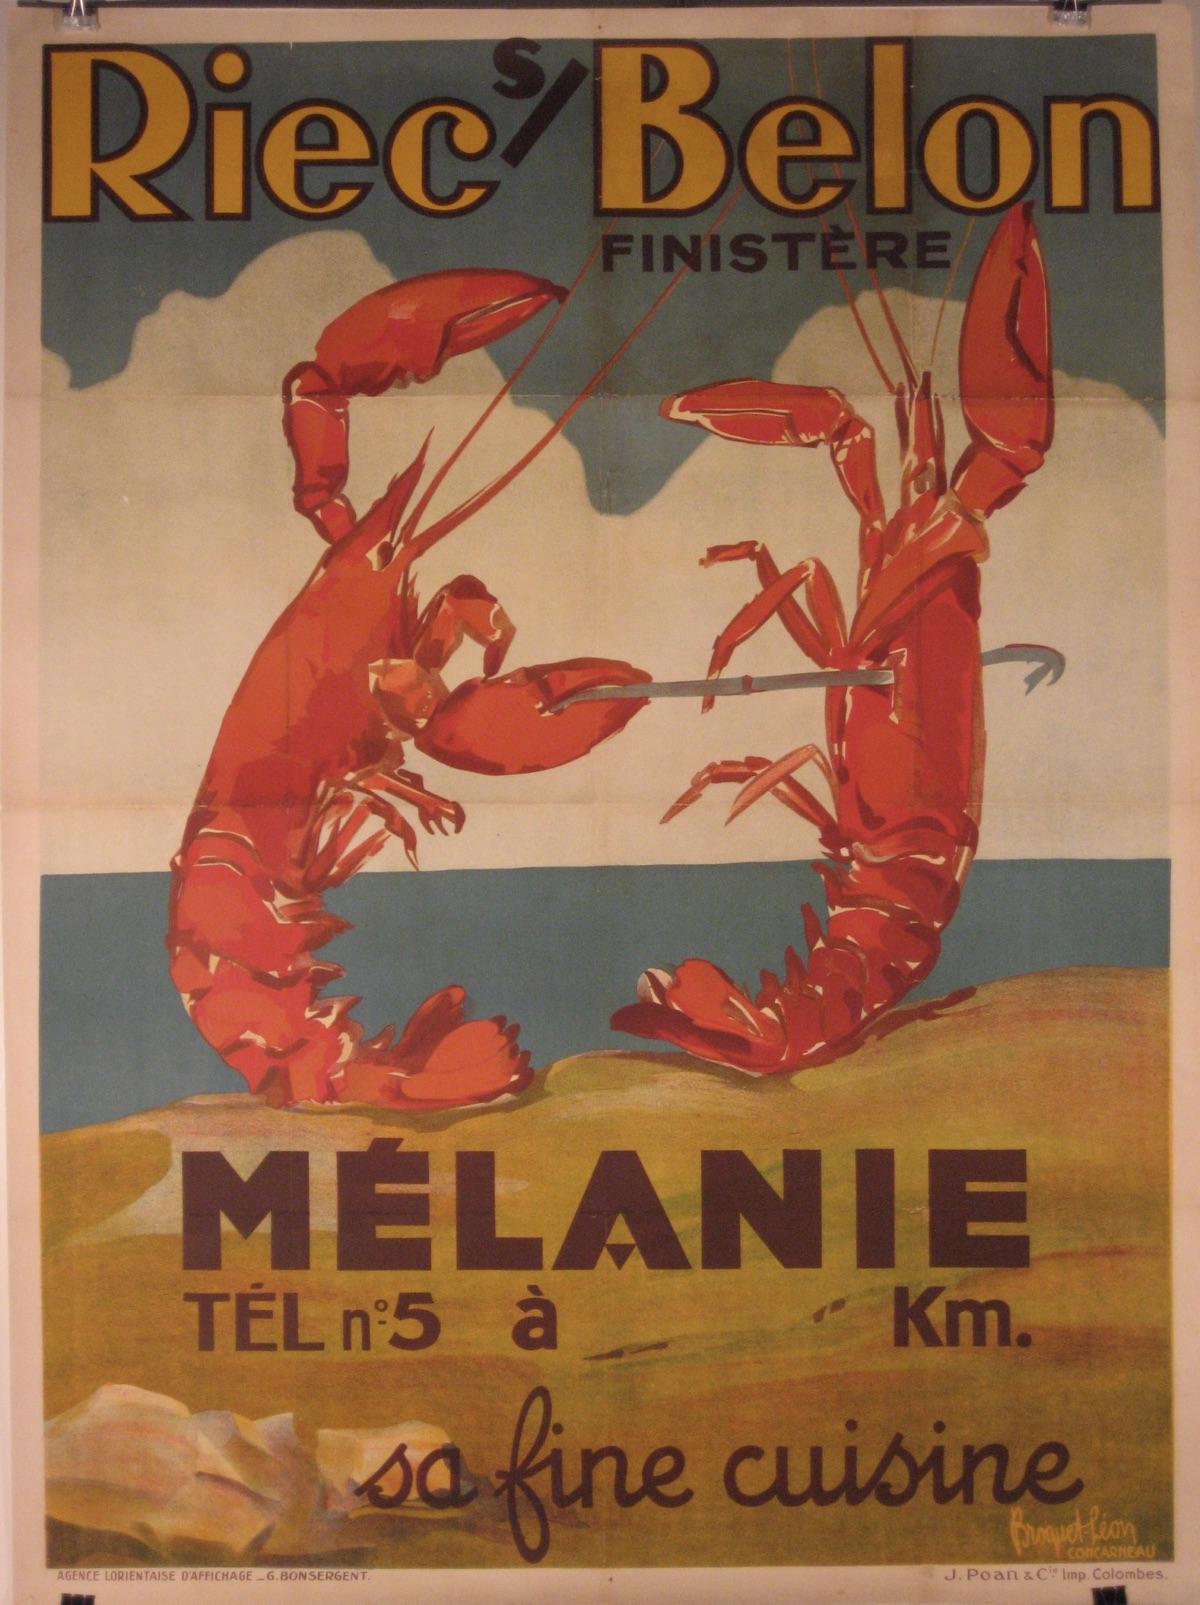 Artist: Leon Esperance Broquet (French 1869 – 1936)

Date of Origin: circa 1930

Medium: Original Stone Lithograph Vintage Poster

Size: 47” x 63”

 

Humoristic poster for the French restaurant Melanie in Riec sur Belon, a commune in the Finistère